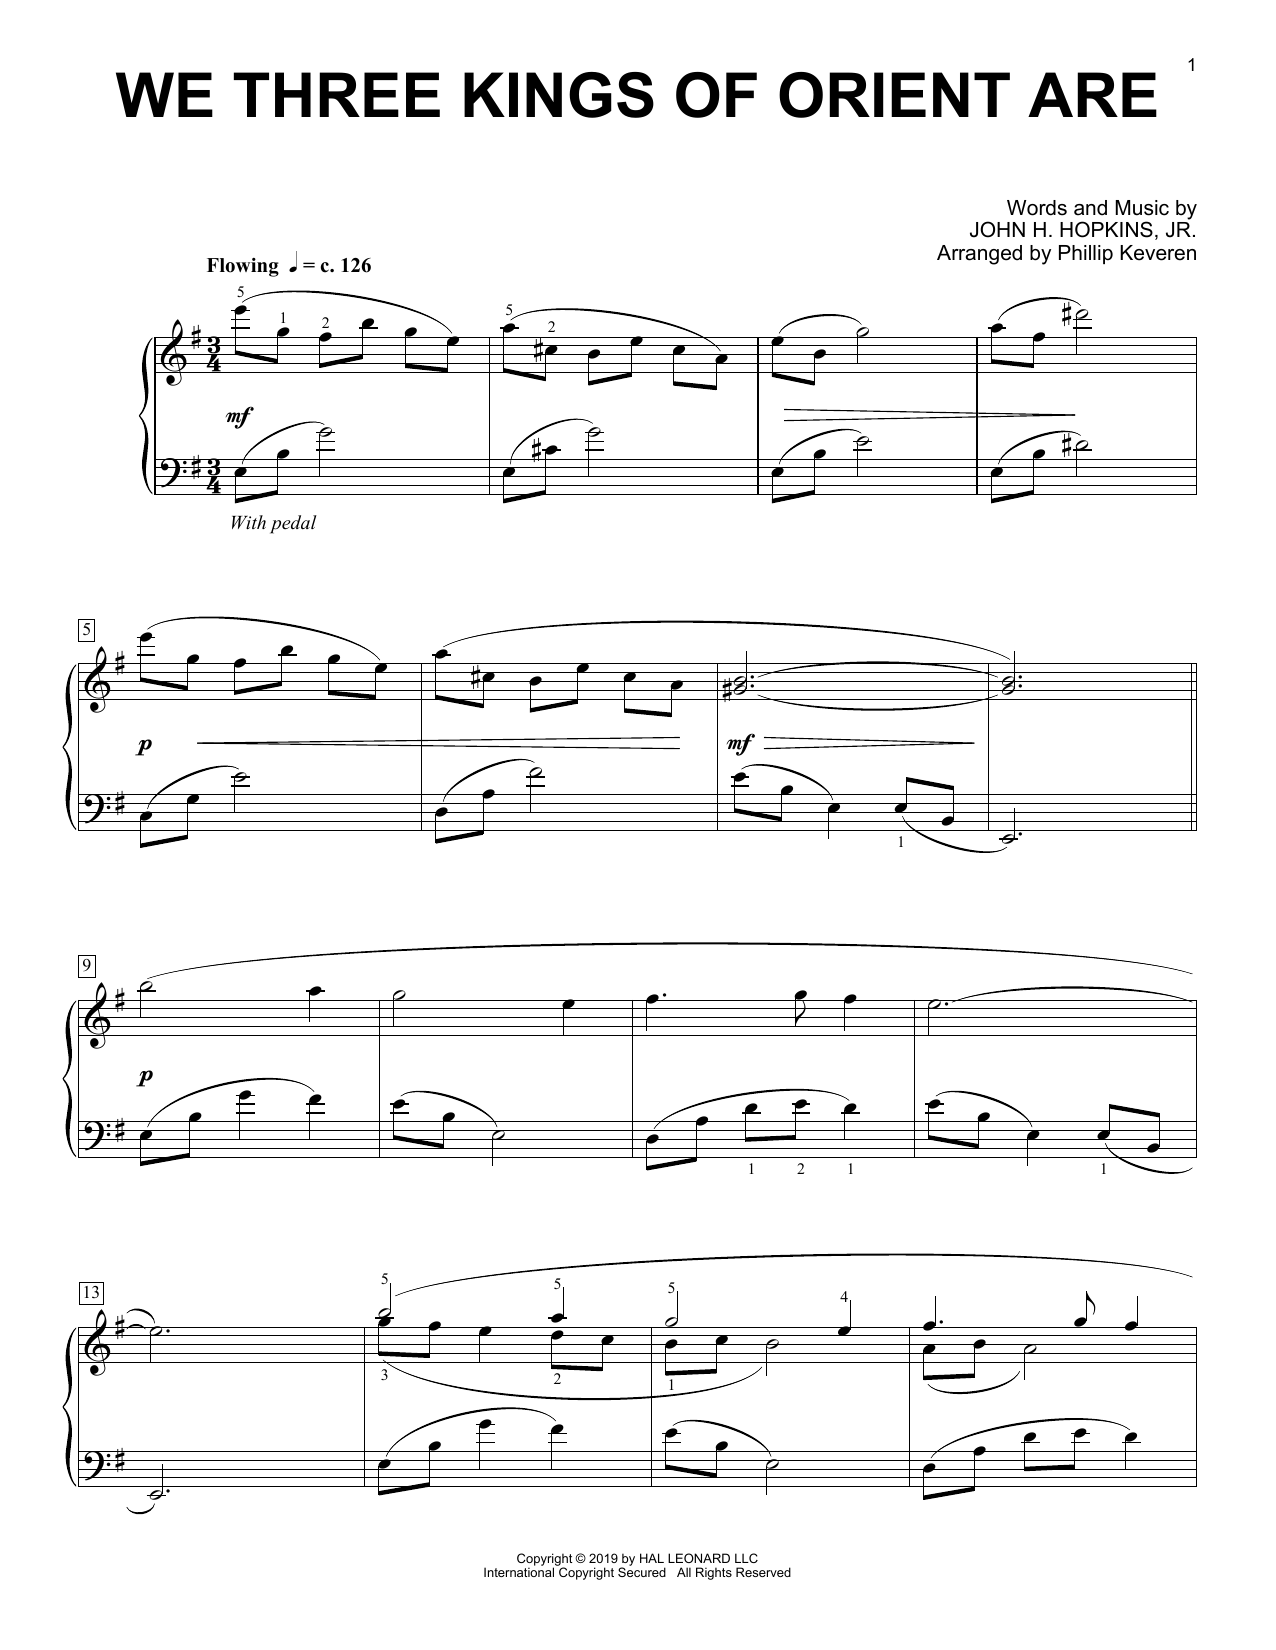 Download John H. Hopkins, Jr. We Three Kings Of Orient Are [Classical Sheet Music